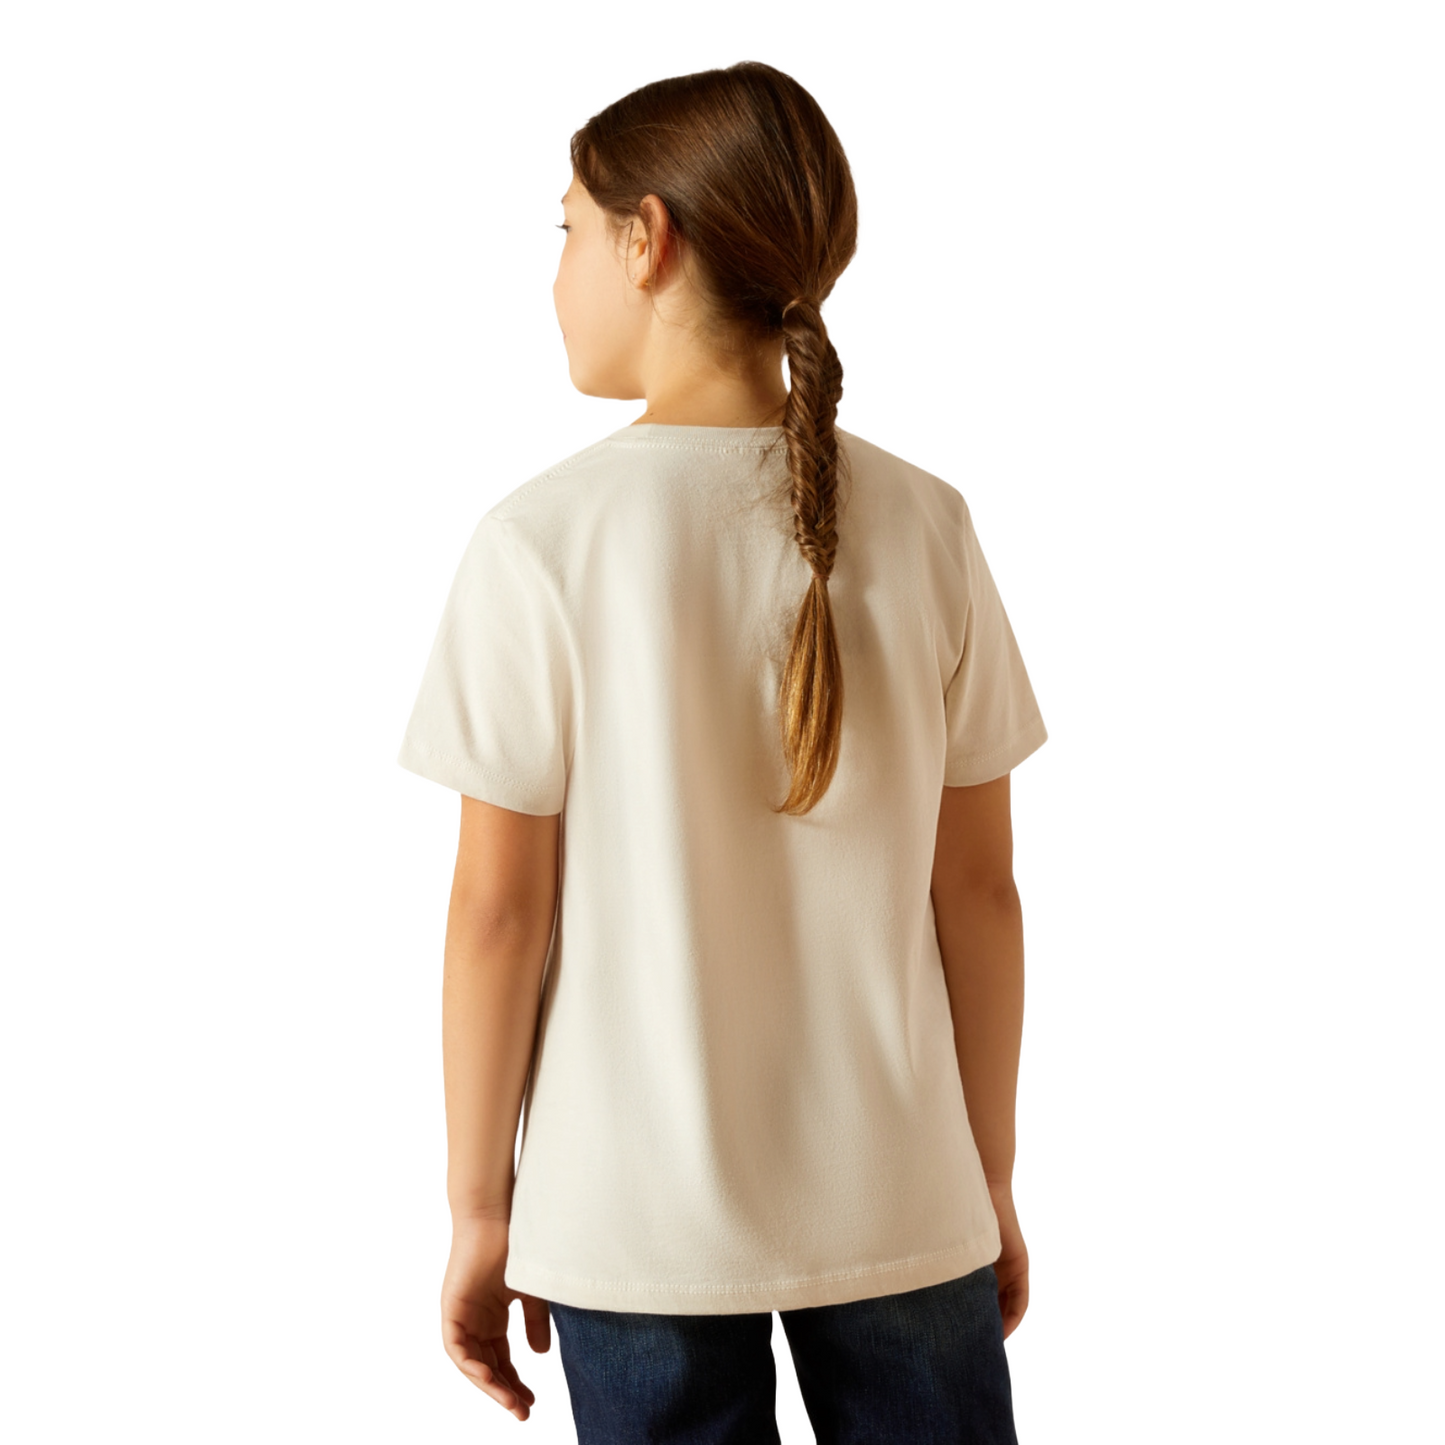 Ariat Girl's Cow Cover Natural Short Sleeve Shirt 10051773